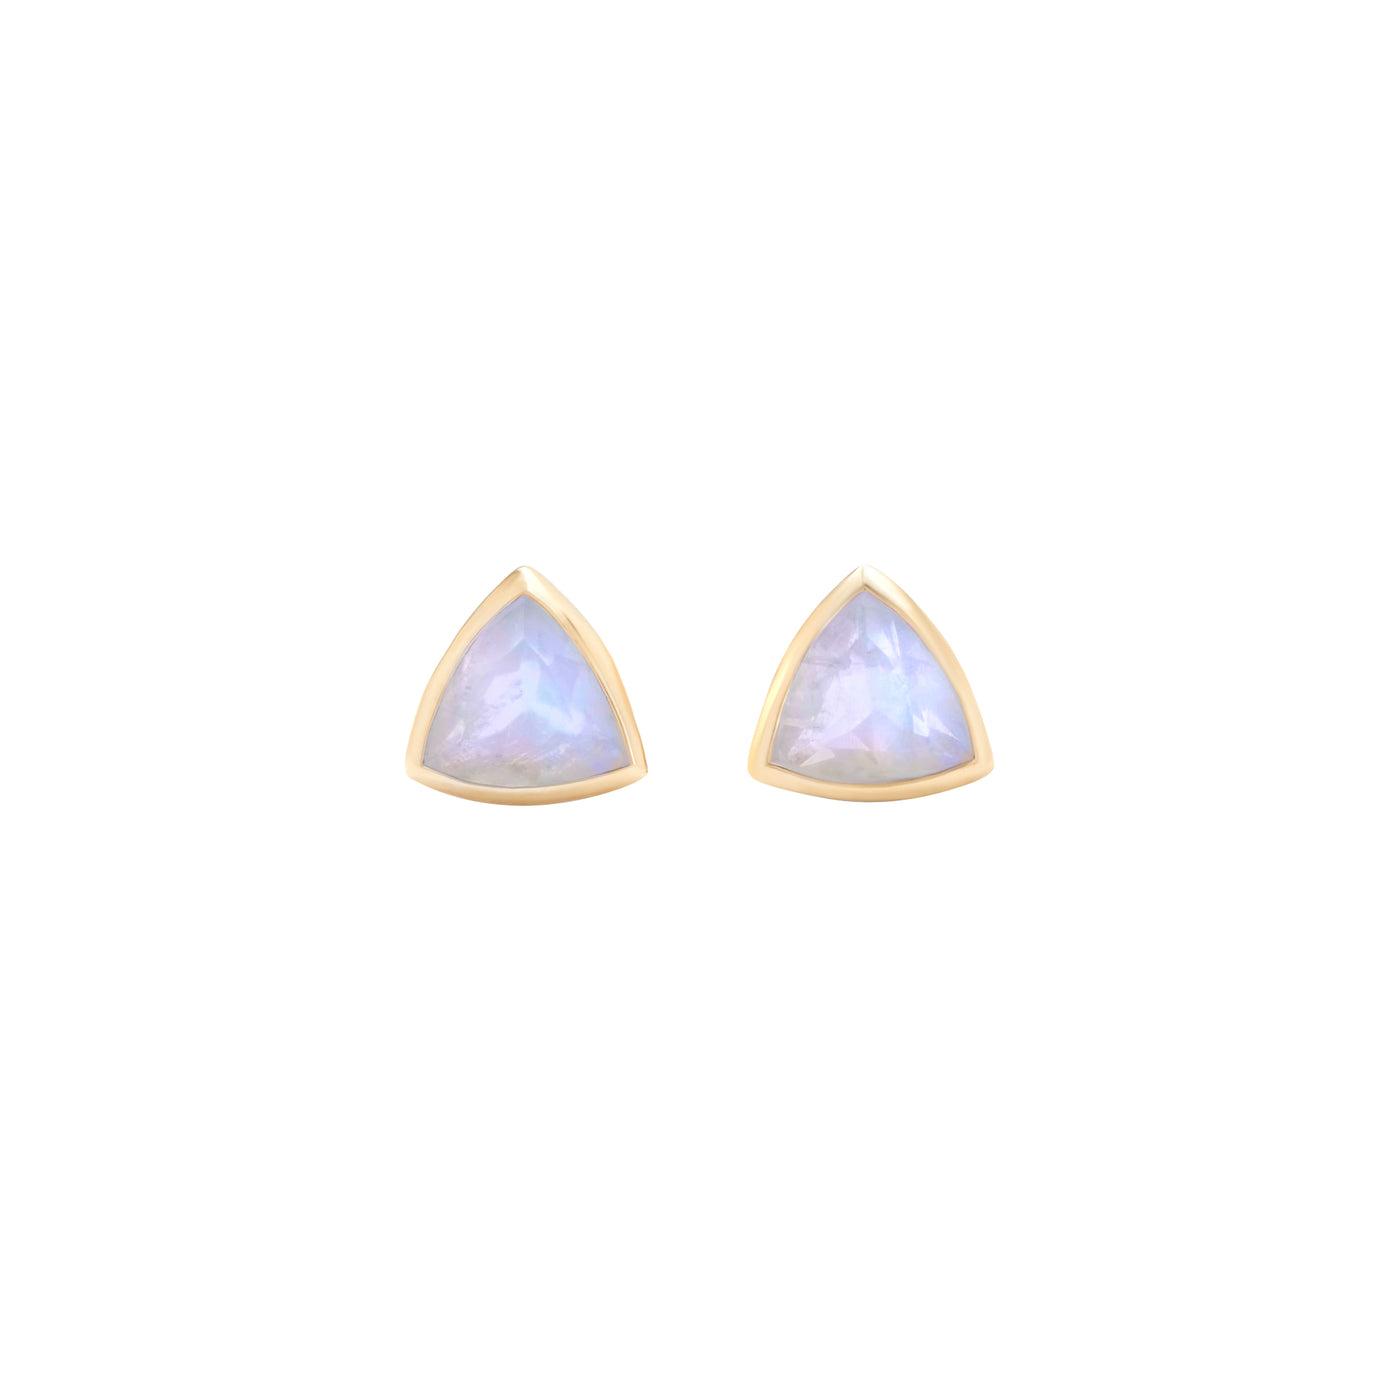 14k Yellow Gold Stud Earrings with Moonstone in Triangle Shape laying Flat on White Background